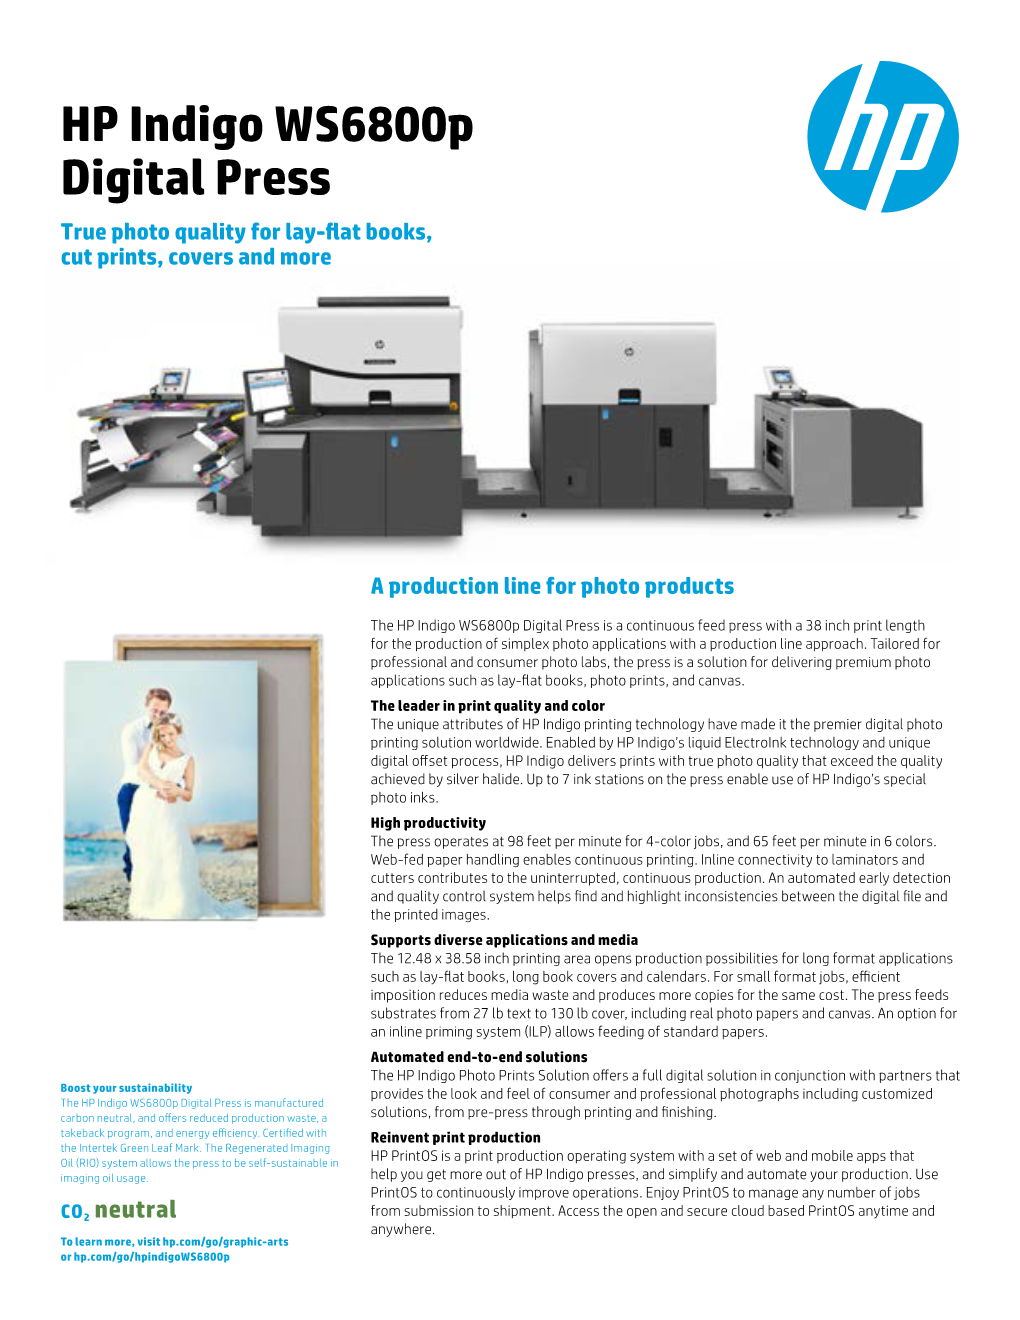 HP Indigo Ws6800p Digital Press True Photo Quality for Lay-Flat Books, Cut Prints, Covers and More